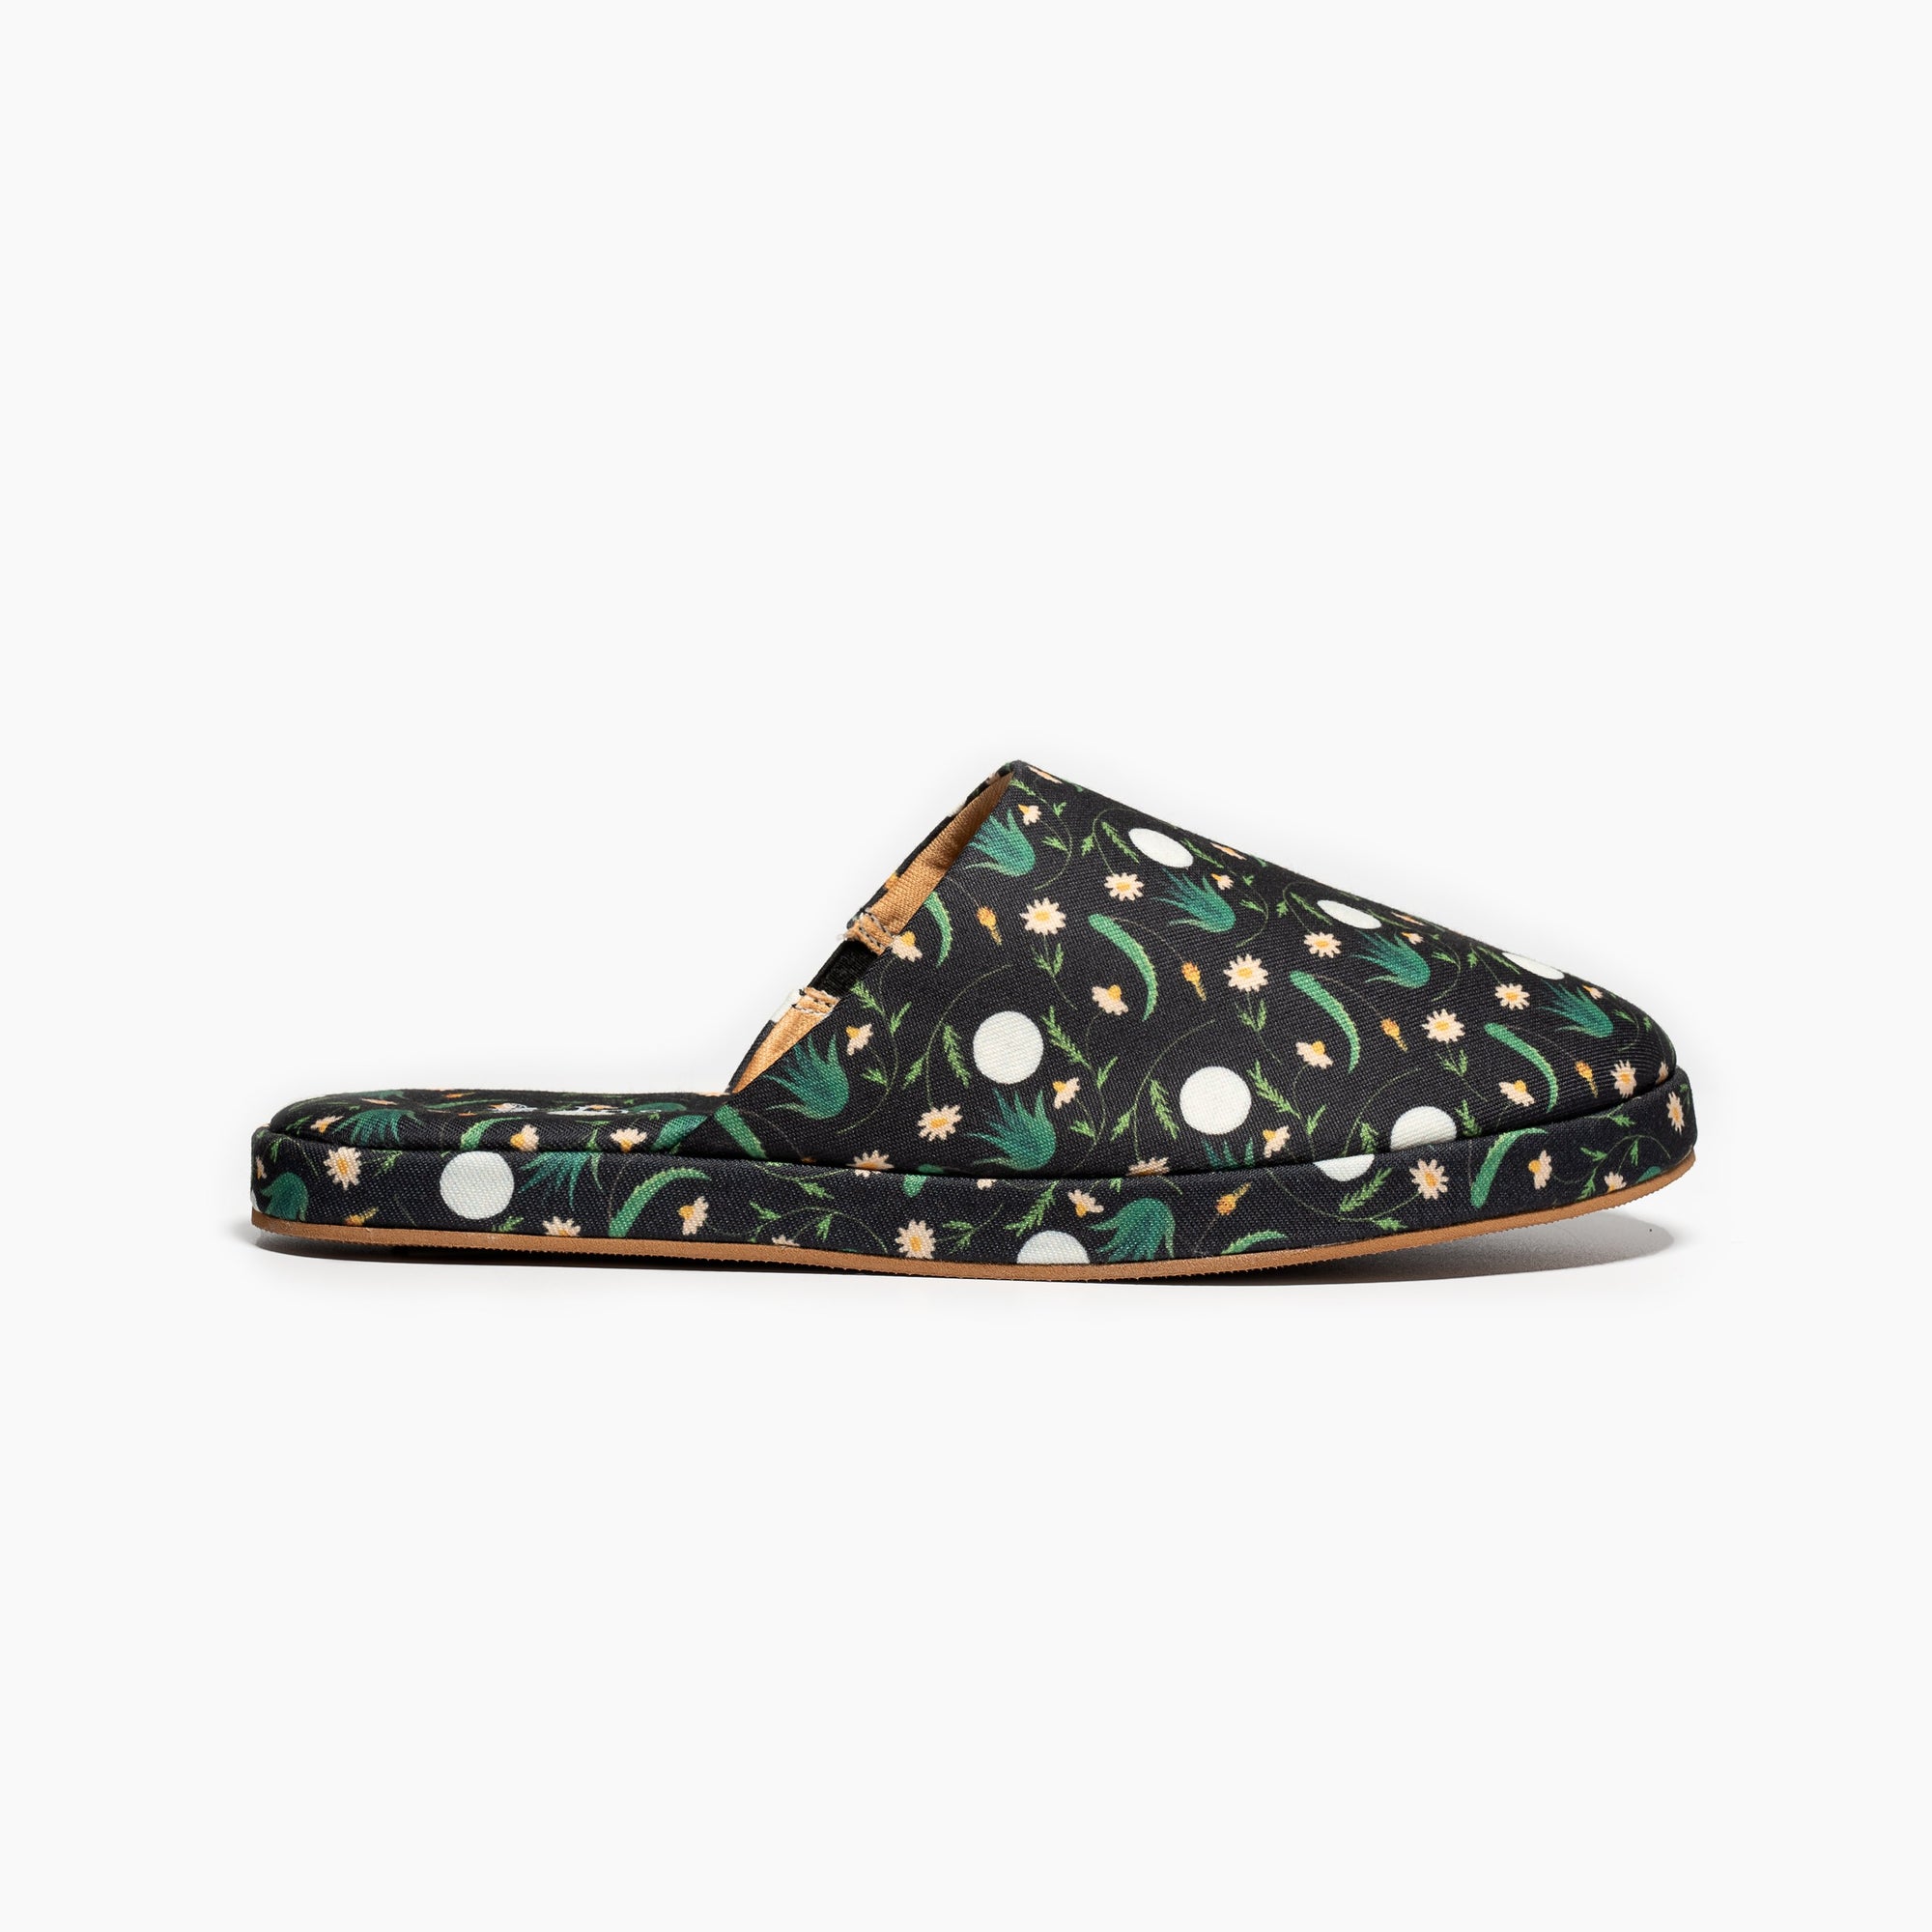 Cancer Slipper - Insecta Shoes